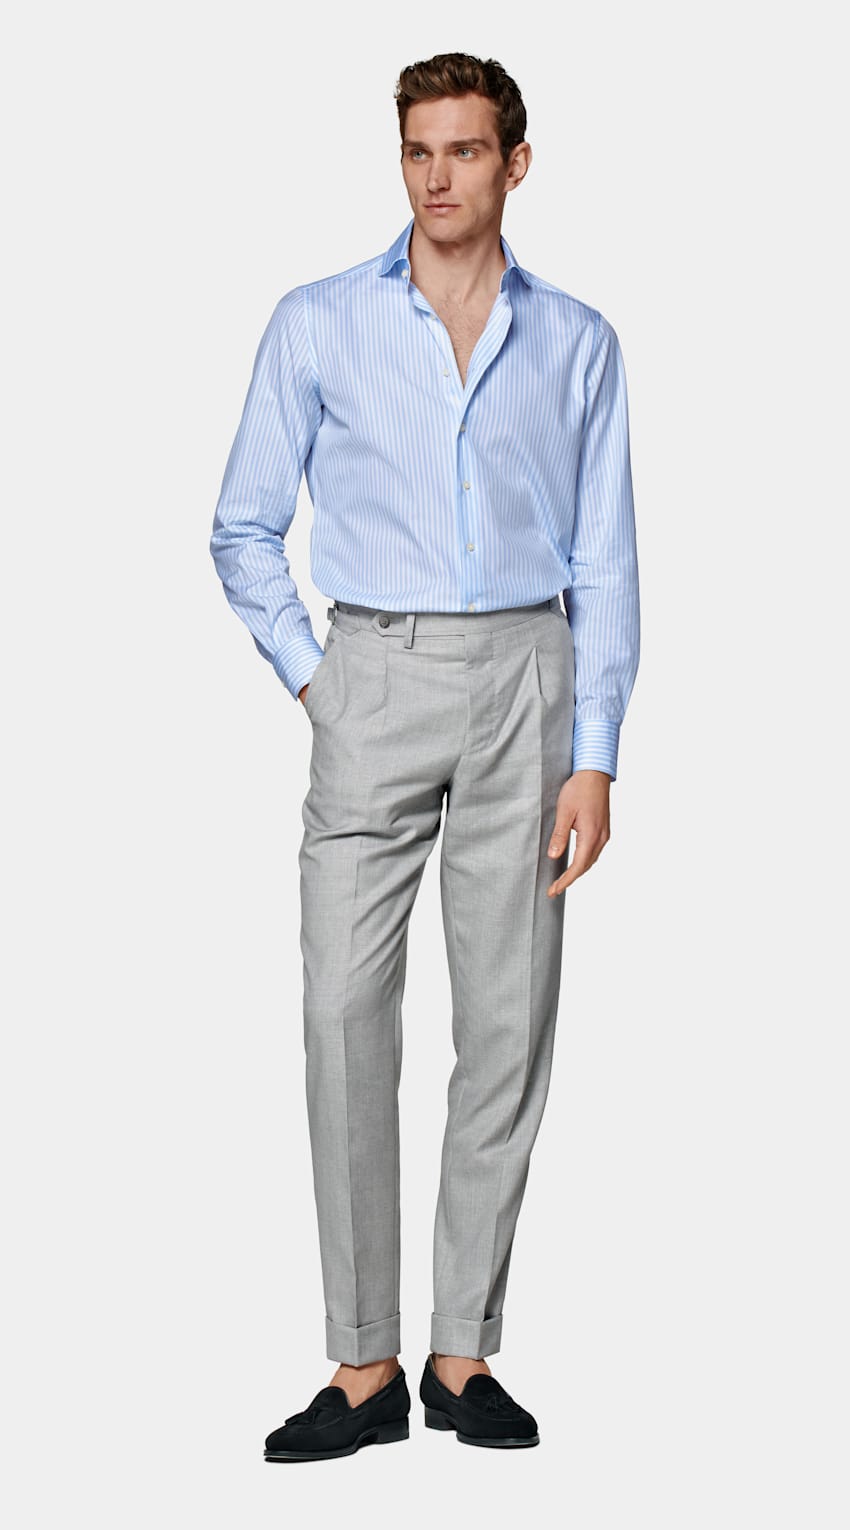 SUITSUPPLY Egyptian Cotton by Tessitura Monti, Italy Light Blue Twill Slim Fit Shirt